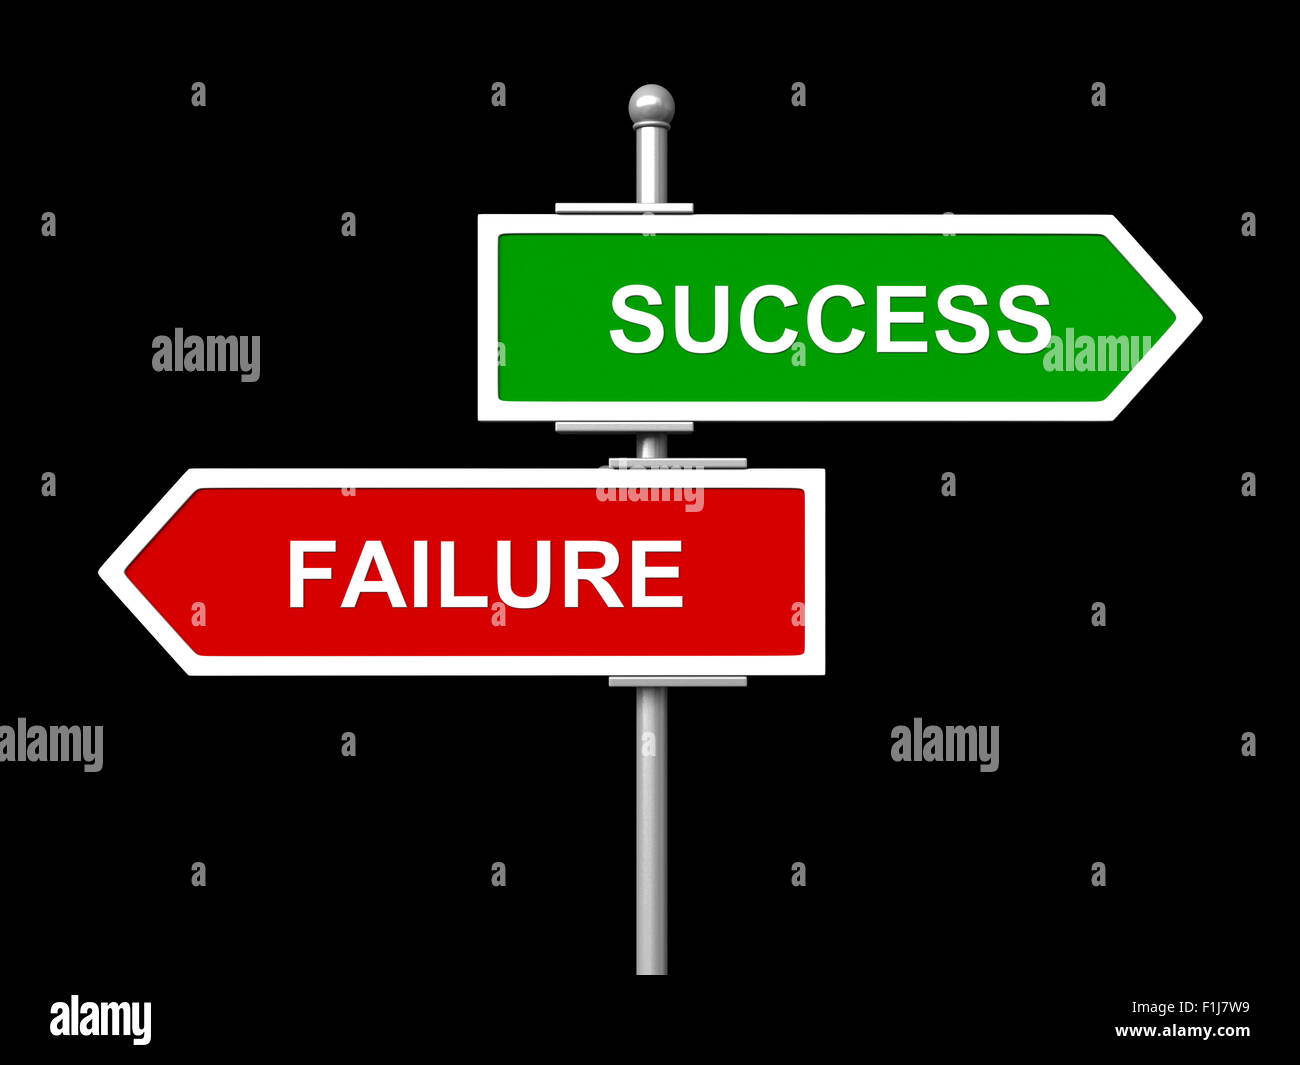 Success and Failure Road Sign Isolated on black background Stock Photo